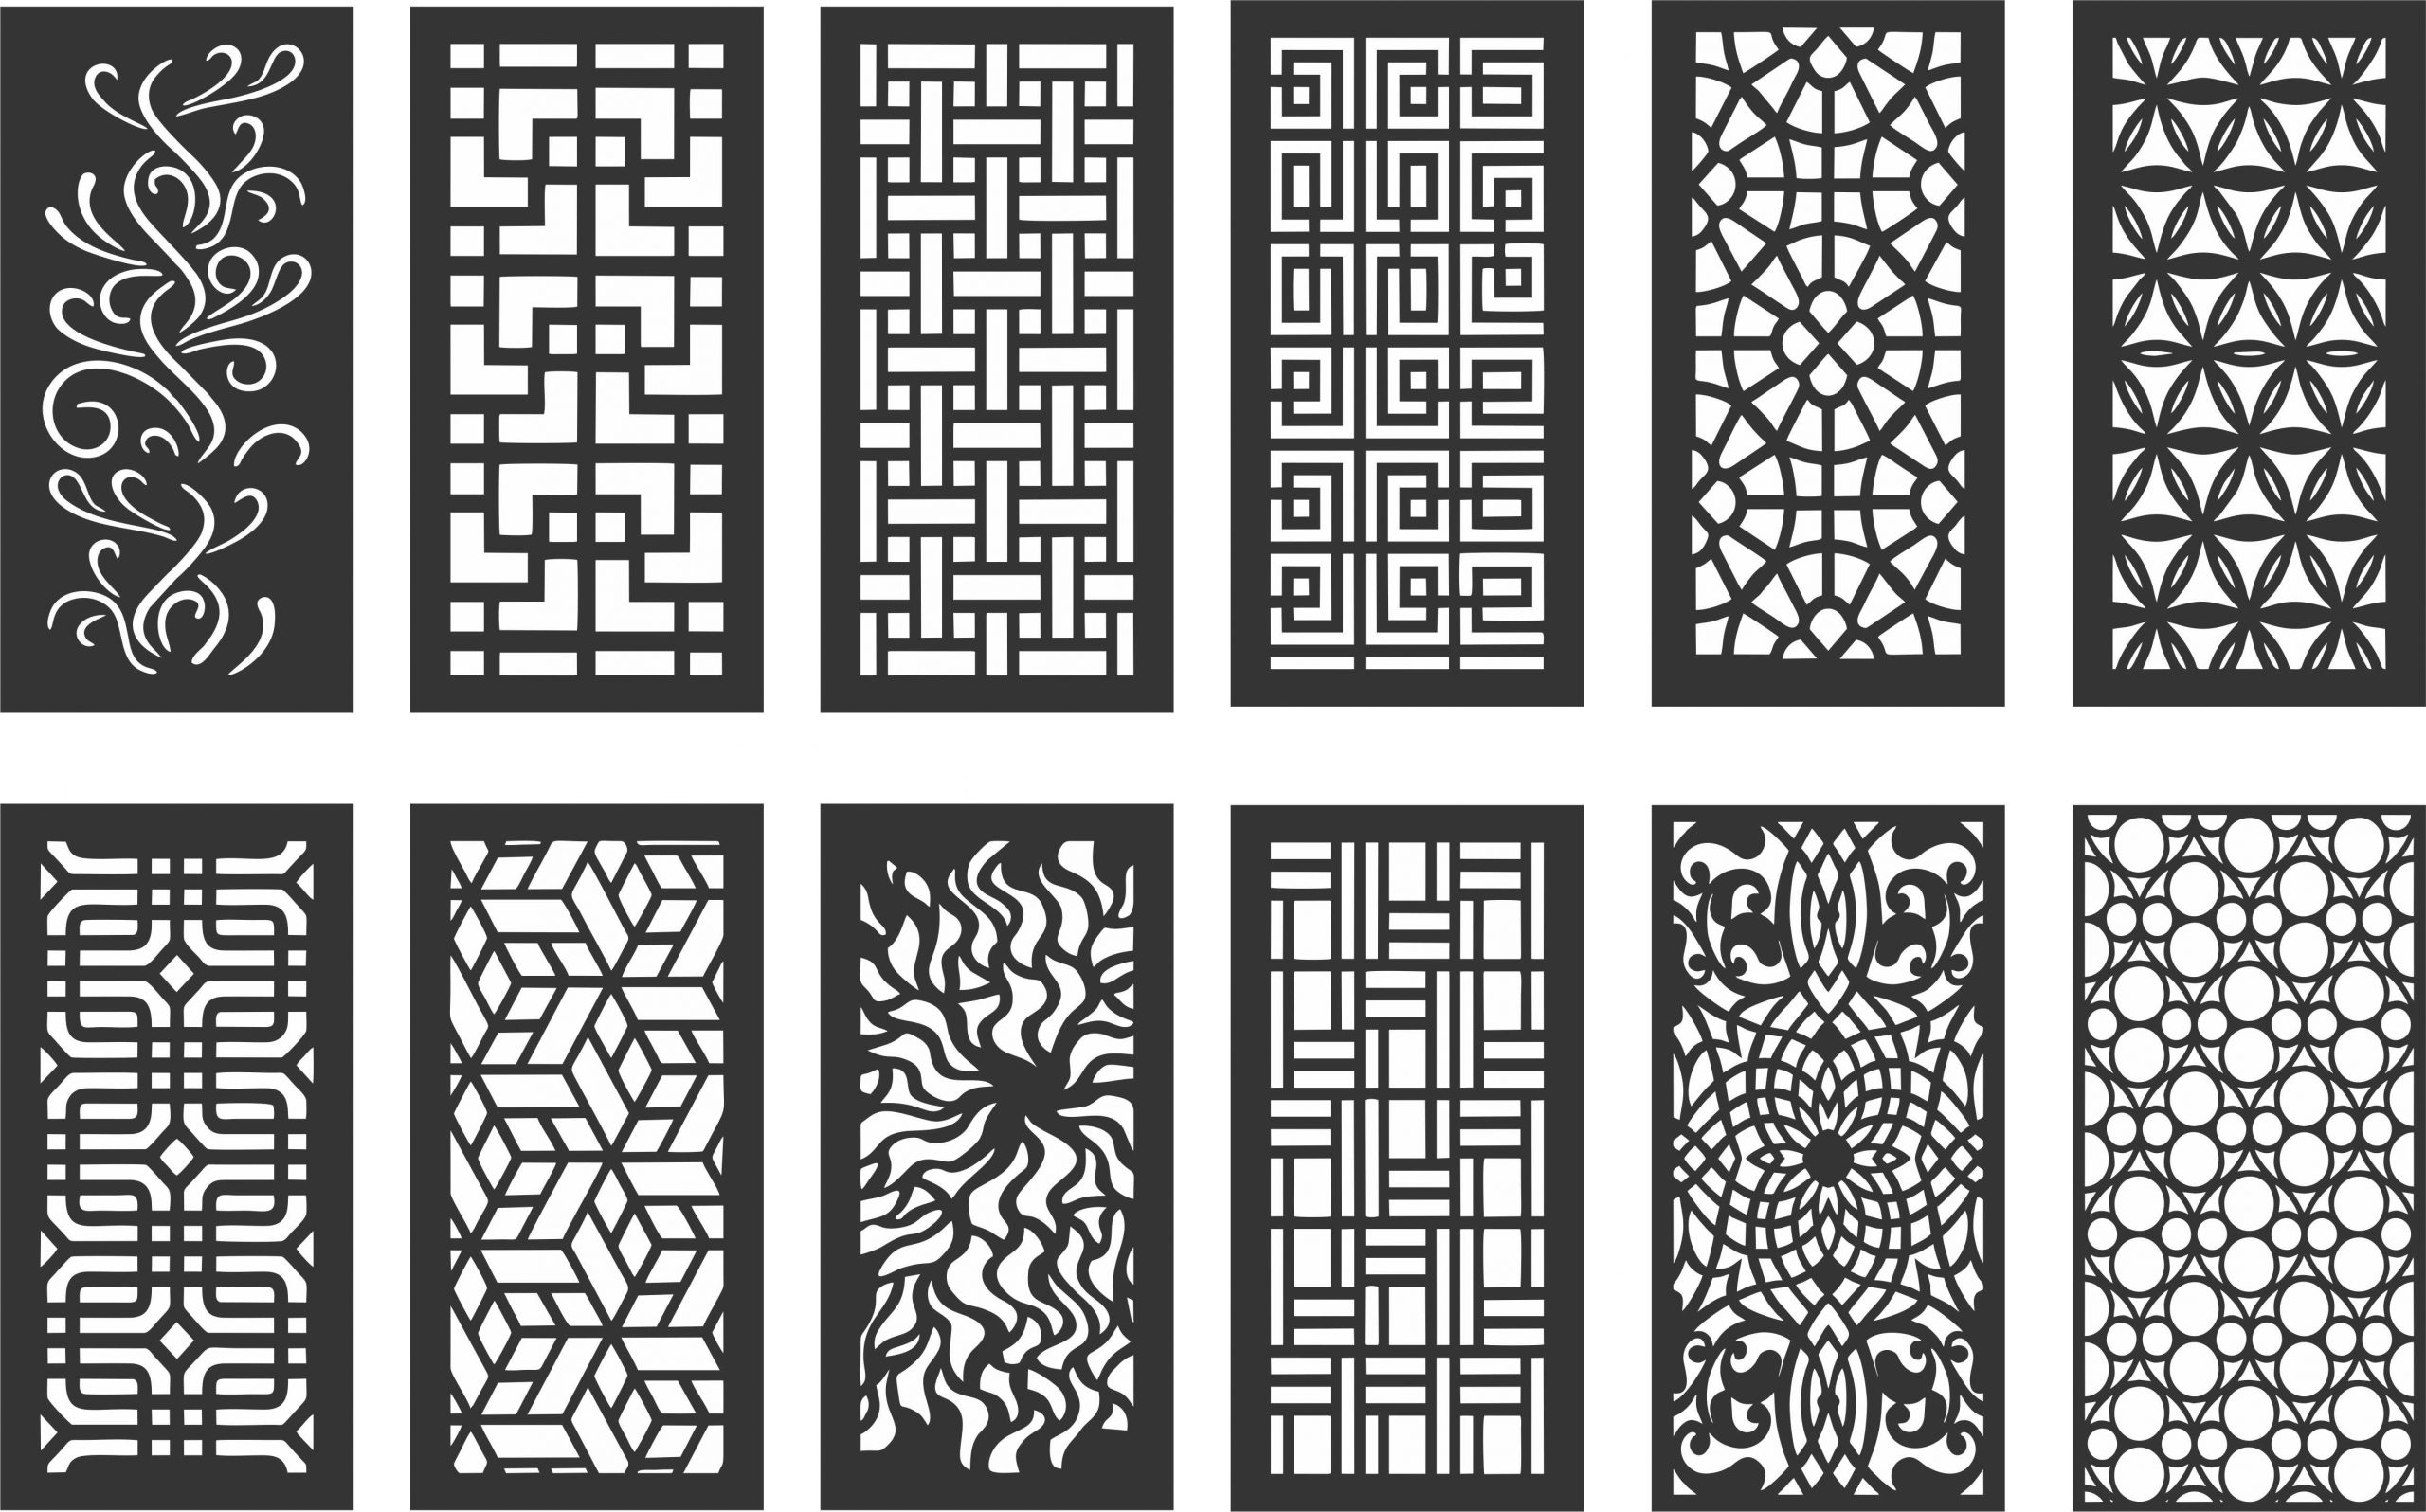 Download 12 Pattern vectors dxf file for cnc - Designs CNC Free Vectors For All Machines Cutting Laser ...